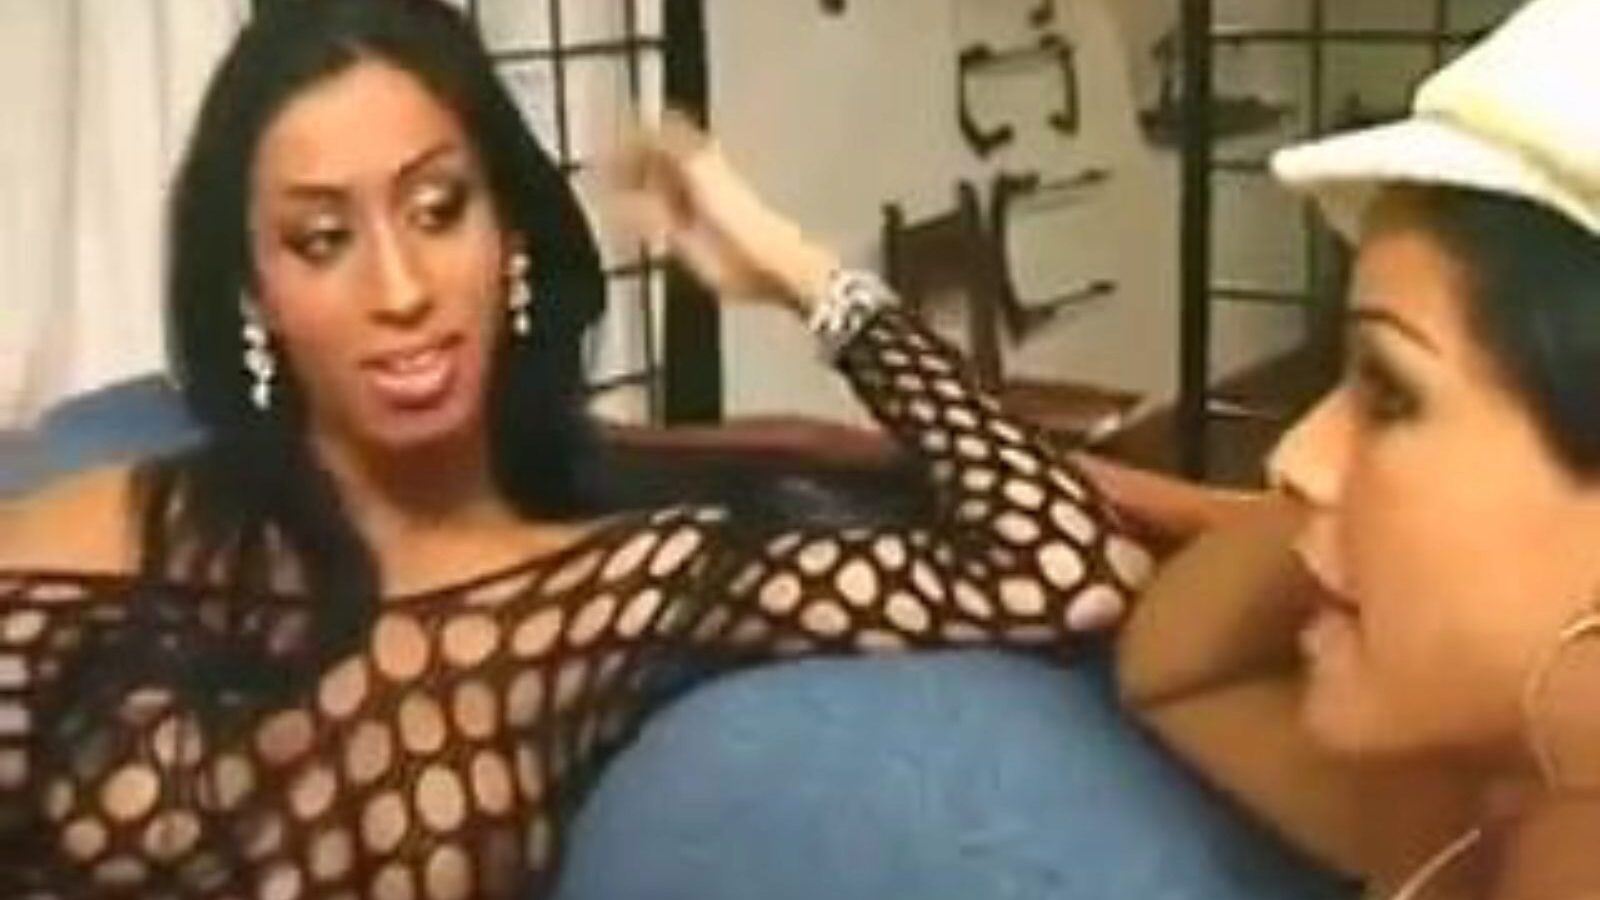 two Hot Trannies: Free Hawt Ladyboy Porn Episode d5 - xHamster See 2 Hawt Shemales tranny fuckfest clip for free-for-all on xHamster - the awesome collection of Hawt Tgirl Tgirl Porn & Large Pointer Sisters porn movie episodes